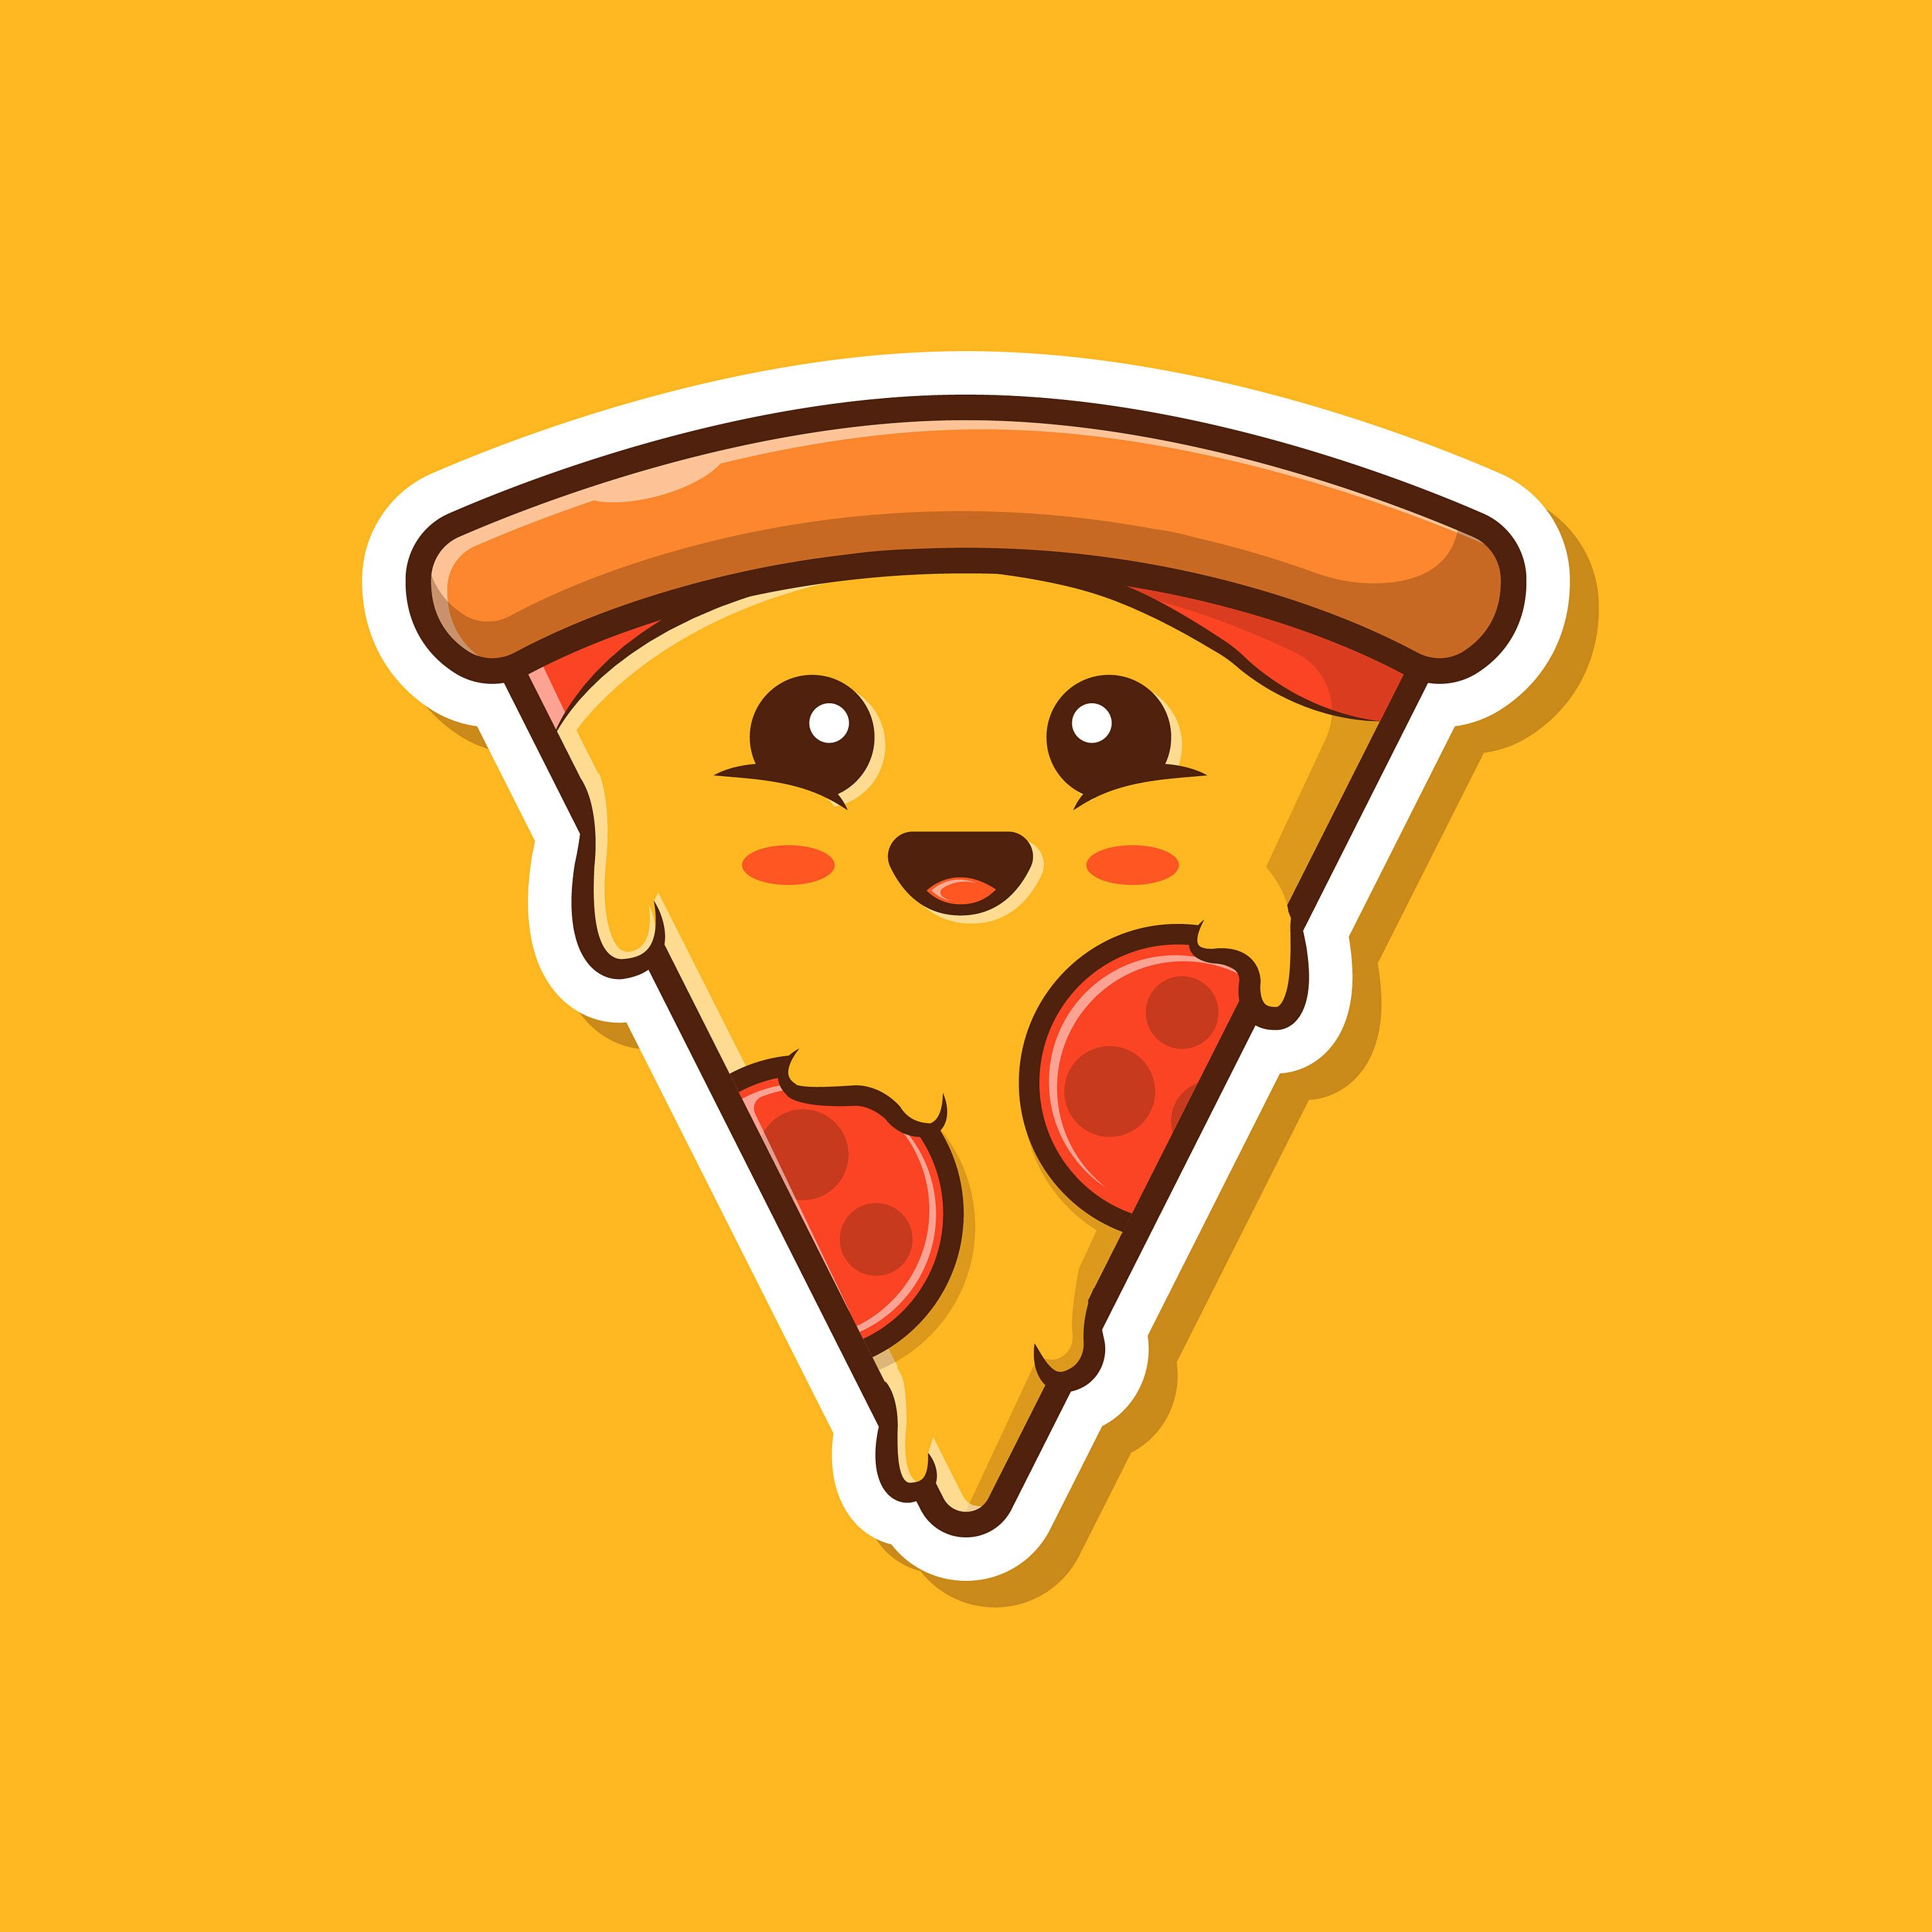 Excited to share the latest addition to my #etsy shop: Cute Pizza Sticker Waterproof For Laptops, Cars, Water Bottles, High. Cute pizza, Pizza art, Pizza drawing